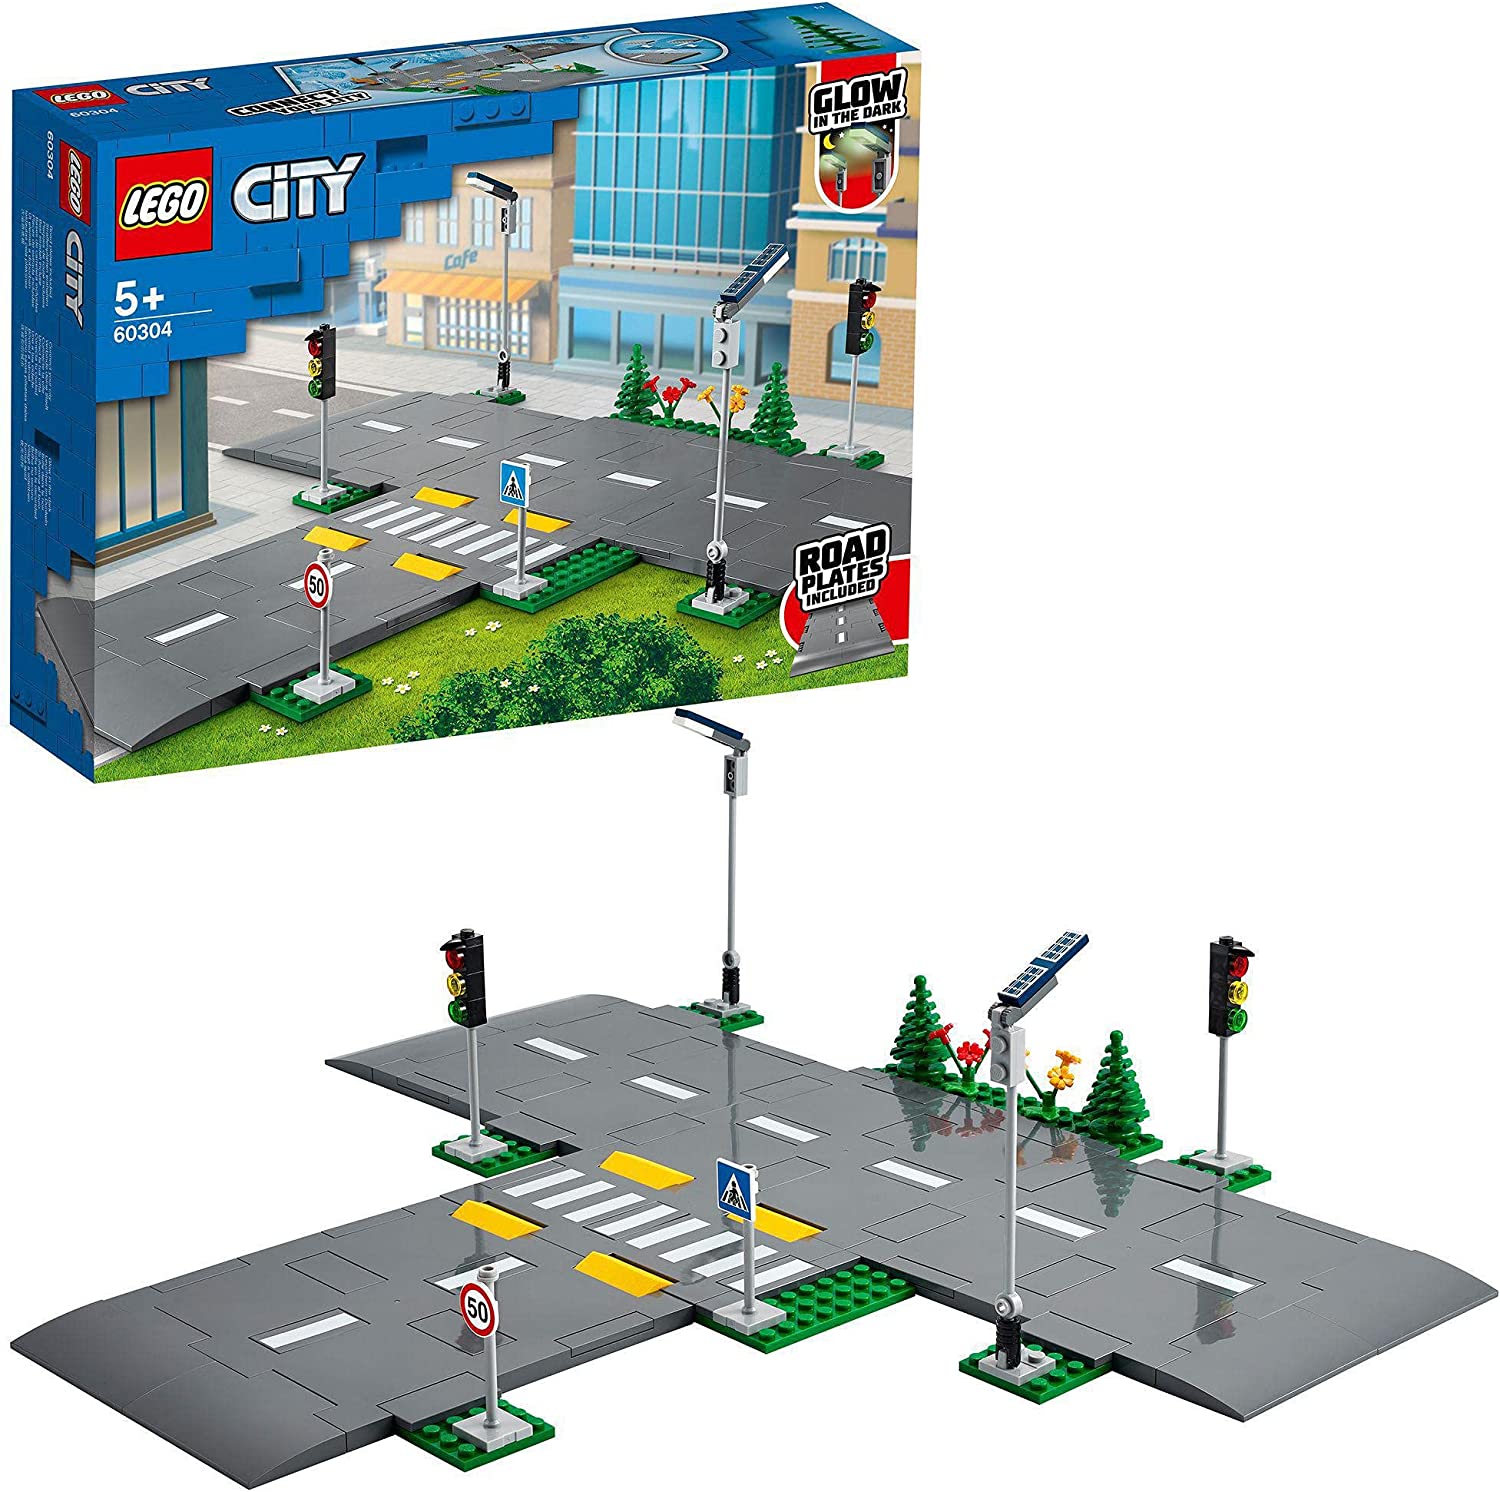 Lego 60304 City Road Cross with Traffic Lights Kit with Glow in the Dark Stones